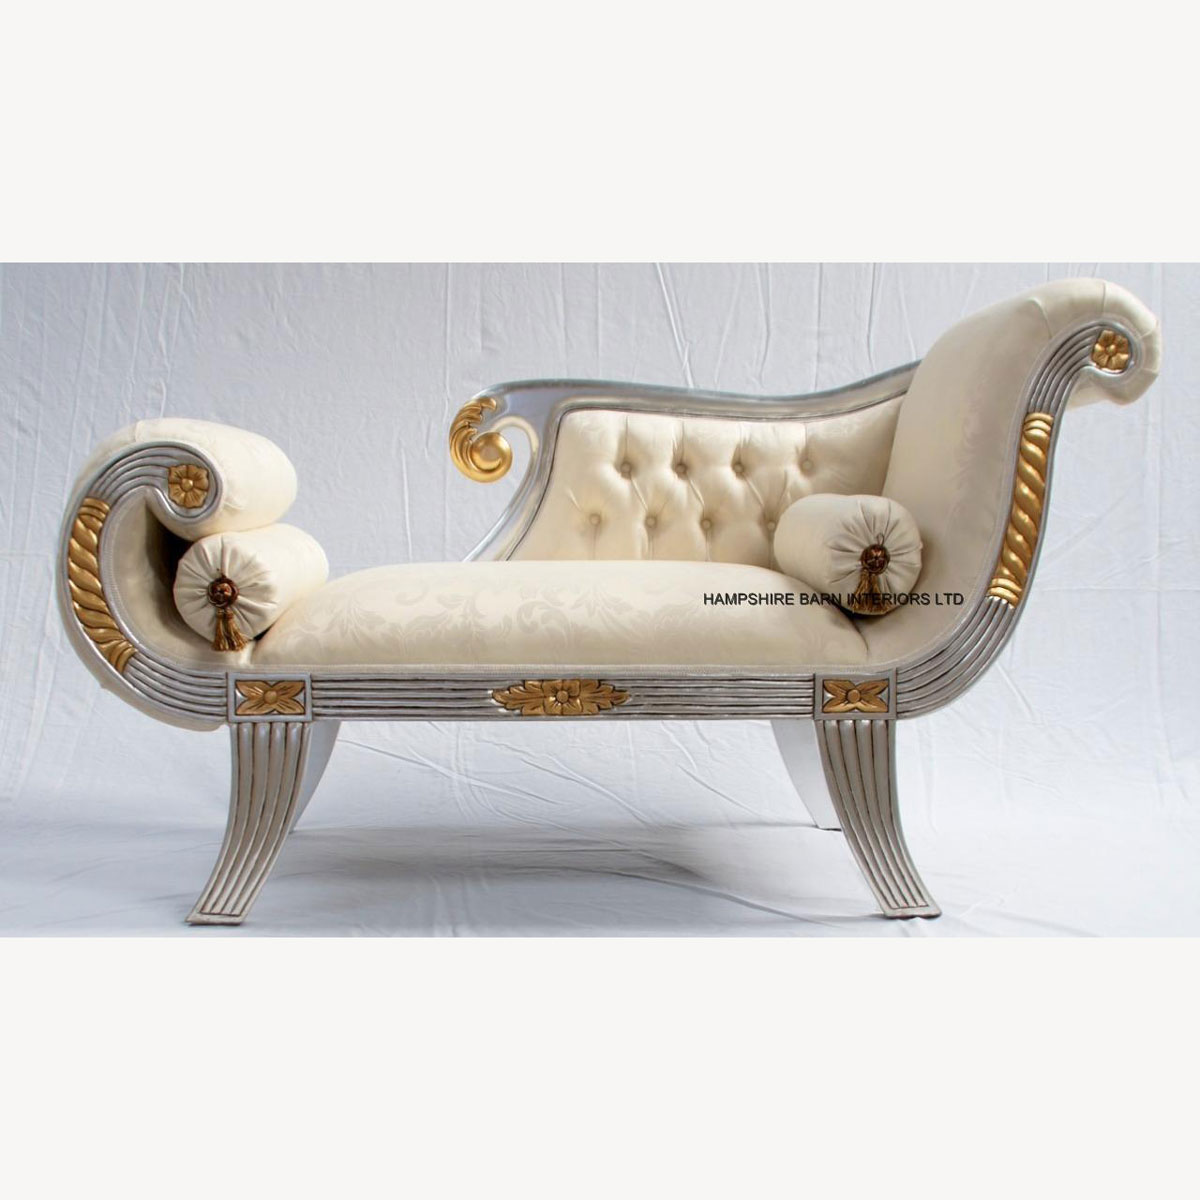 Beautiful Small Knightsbridge Chaise Longue Shown In Silver Leaf Frame With Gold Detailing And Ivory Cream Fabric 1 - Hampshire Barn Interiors - Beautiful Small Knightsbridge Chaise Longue Shown In Silver Leaf Frame With Gold Detailing And Ivory Cream Fabric -